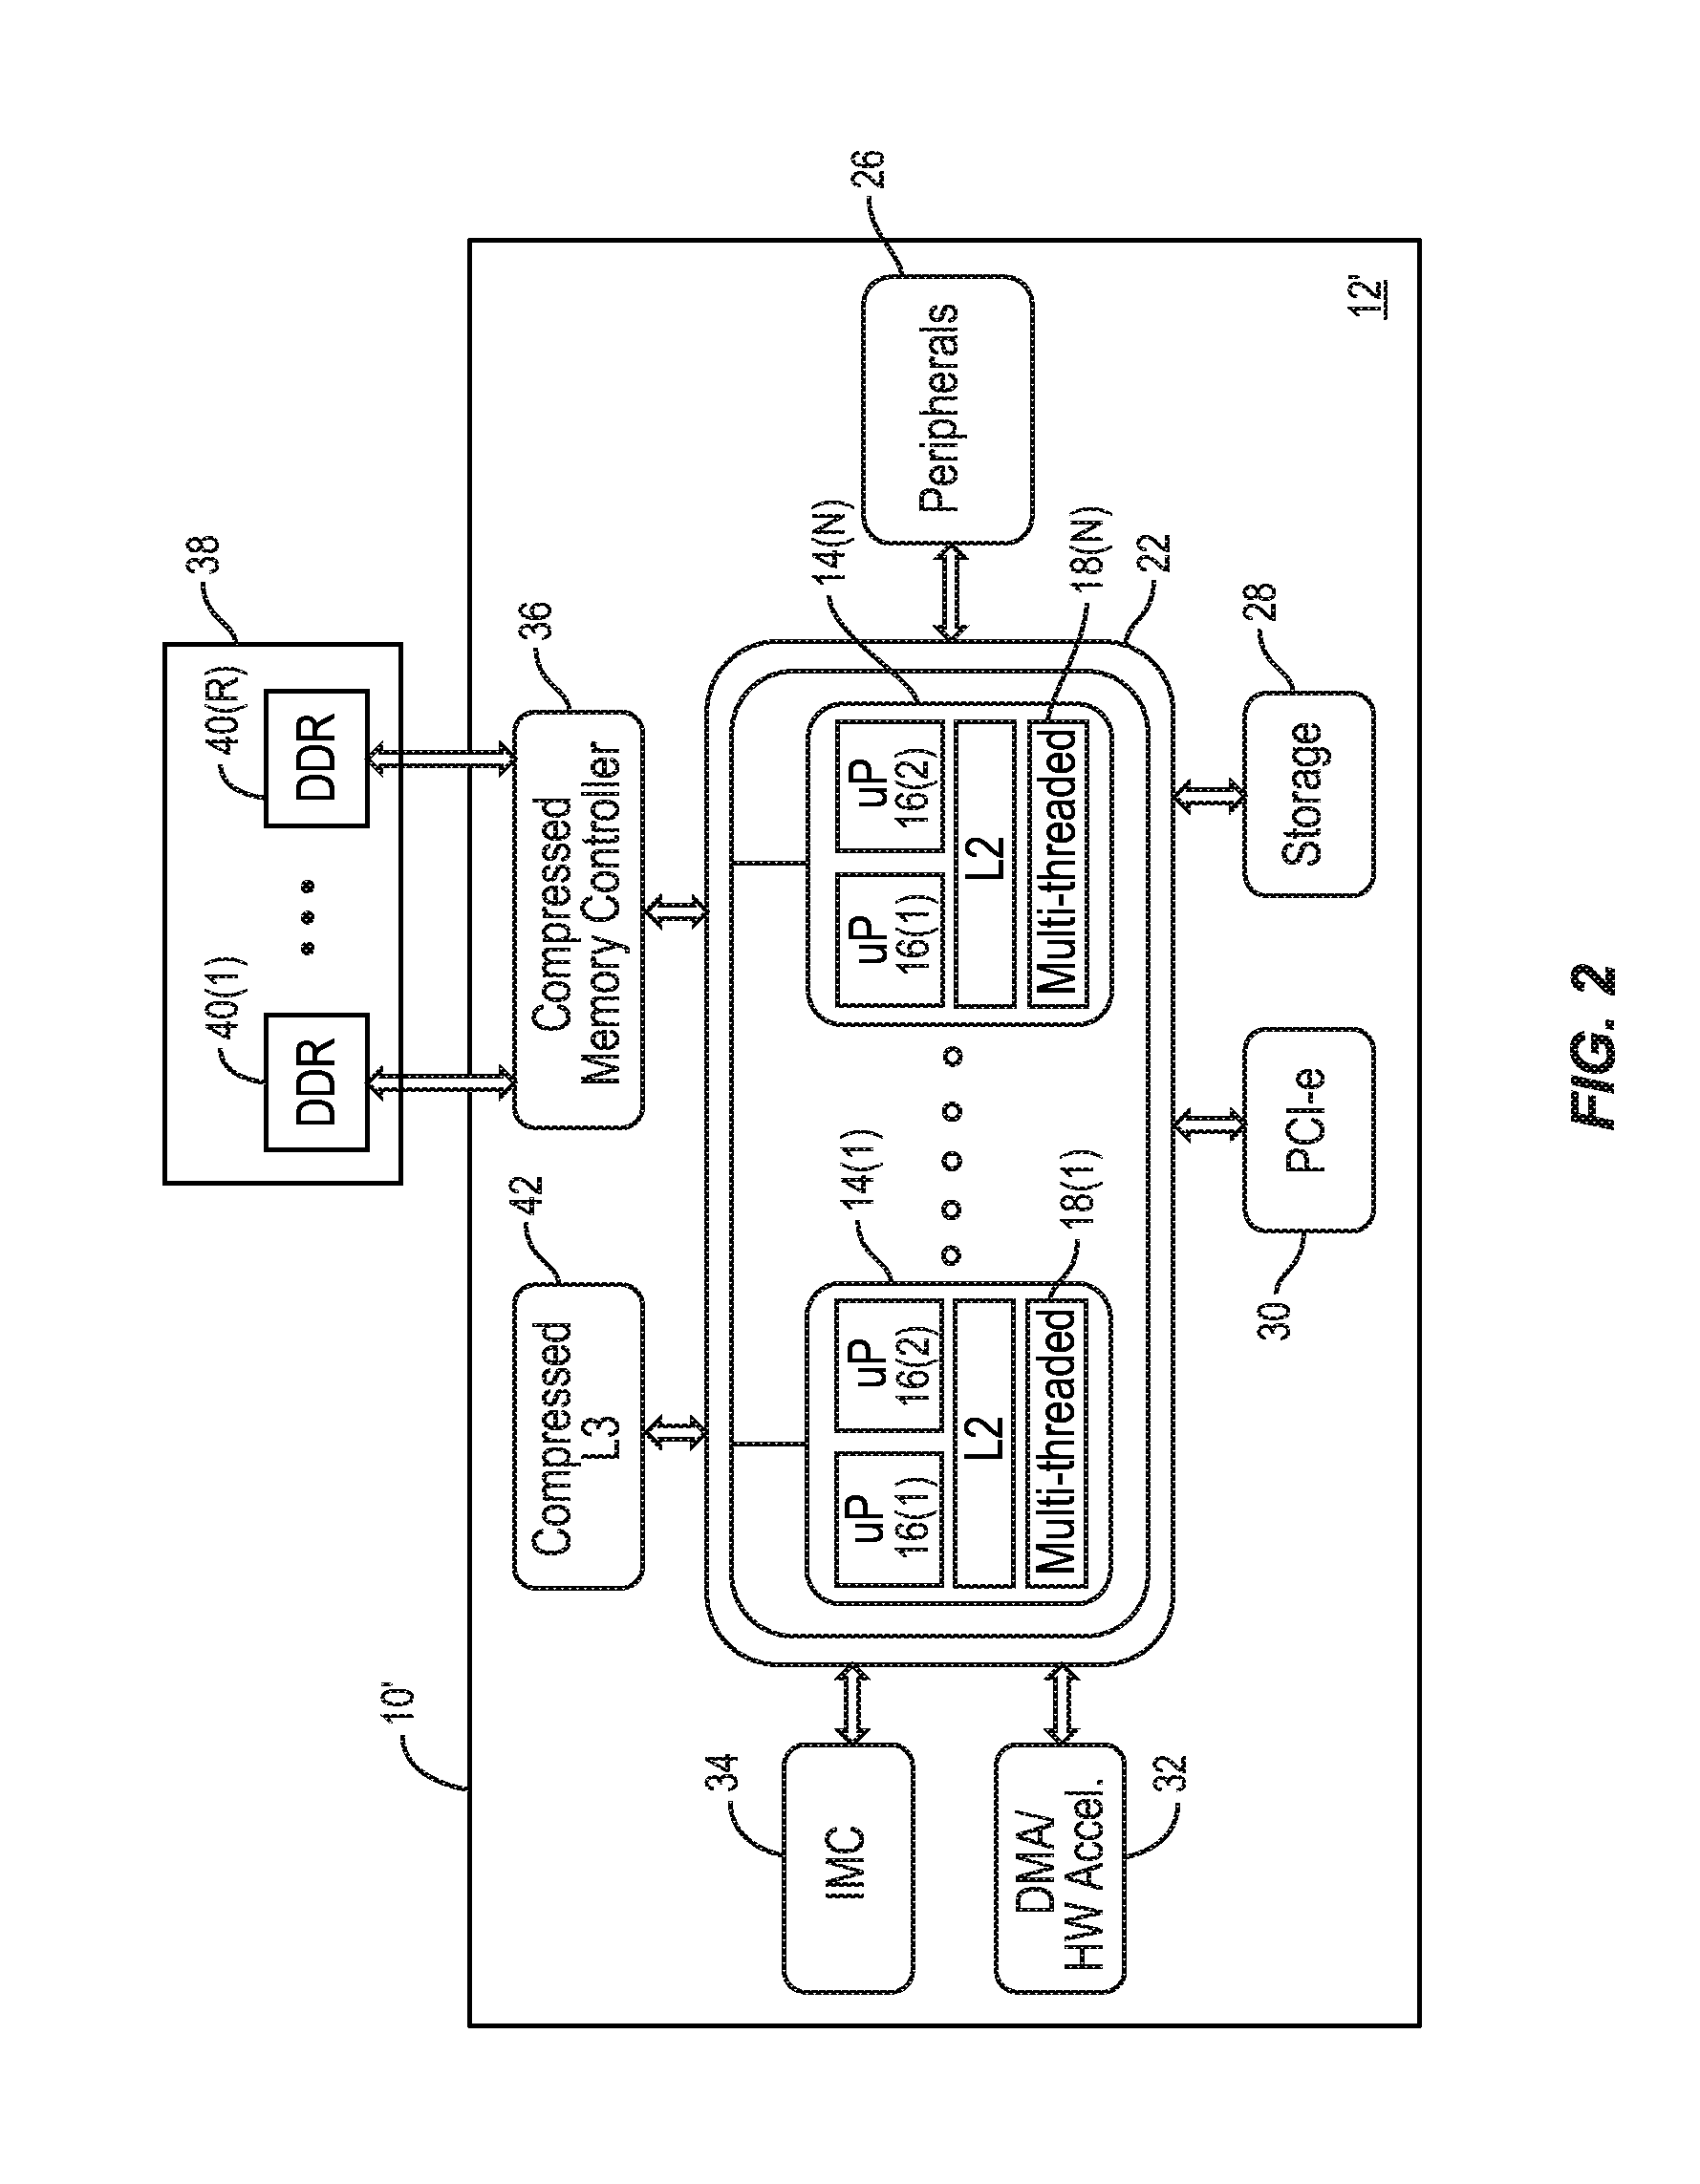 Memory controllers employing memory capacity and/or bandwidth compression with next read address prefetching, and related processor-based systems and methods